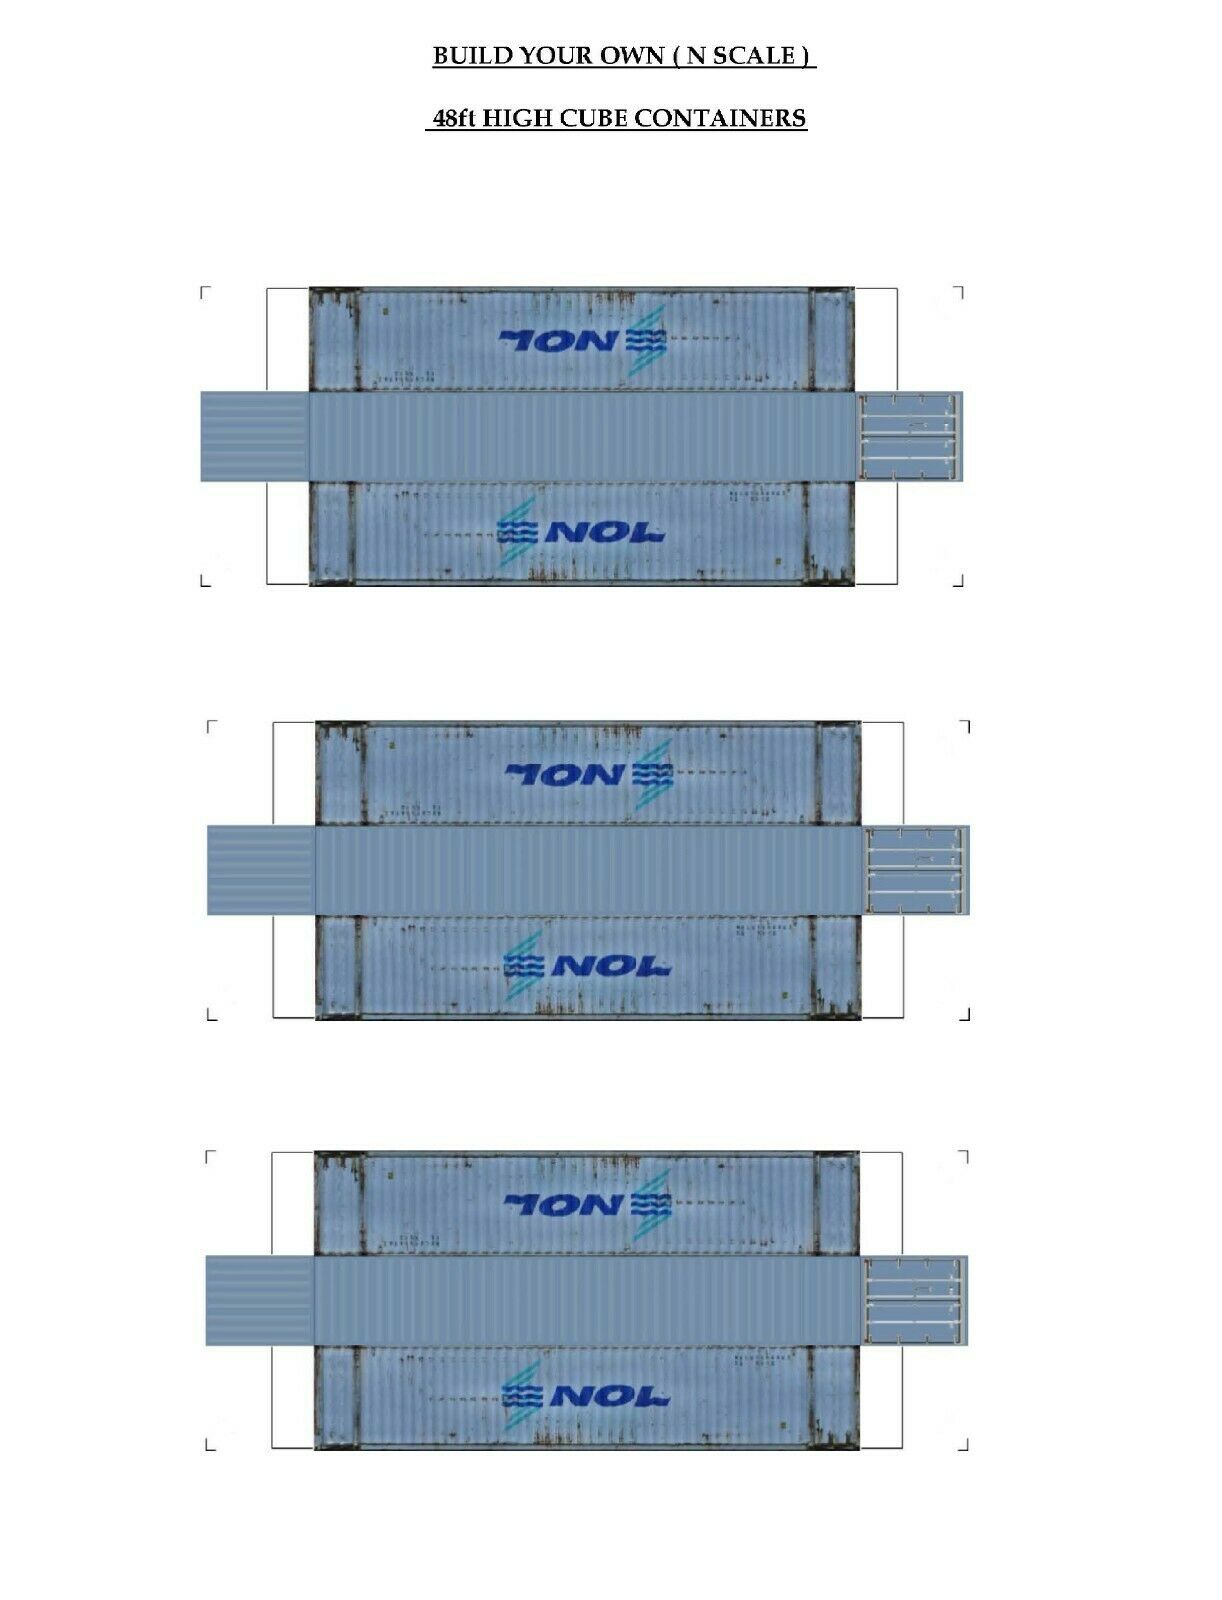 N Scale. Build Your Own 48' Hi Cube Containers. Nol.